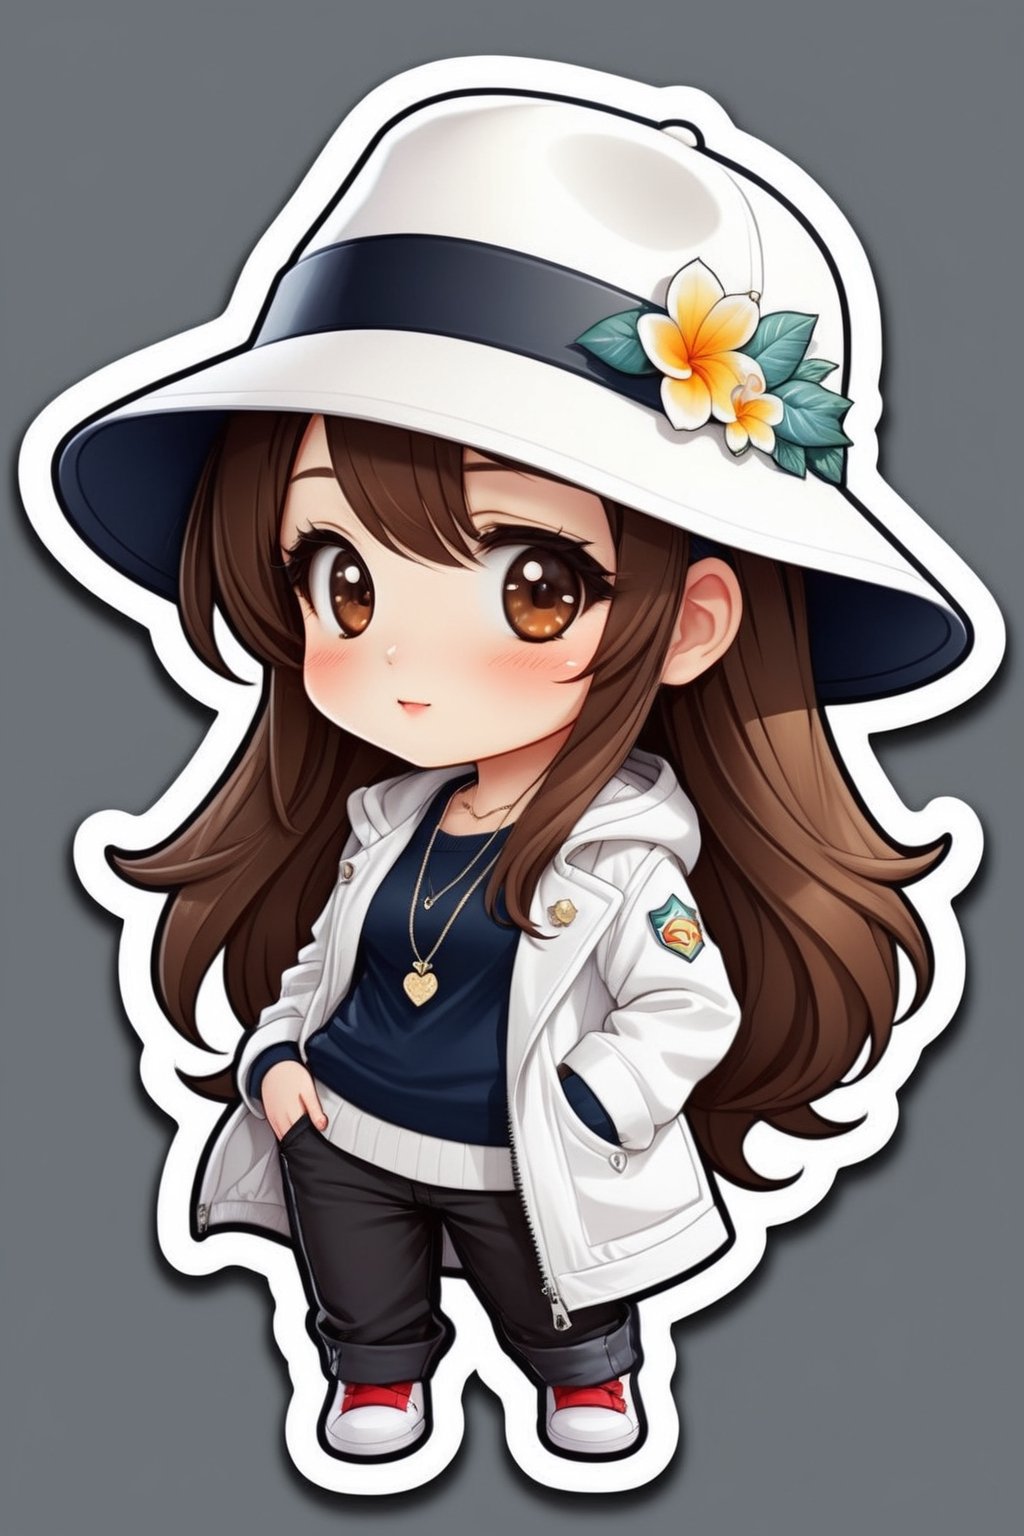 high quality, cute stickers, style cartoon, cute Super Deformed Character, white border, colorful, Detailed illustration of a woman wearing a Helen Kaminski hat with her hands in her pockets, by yukisakura, awesome full color